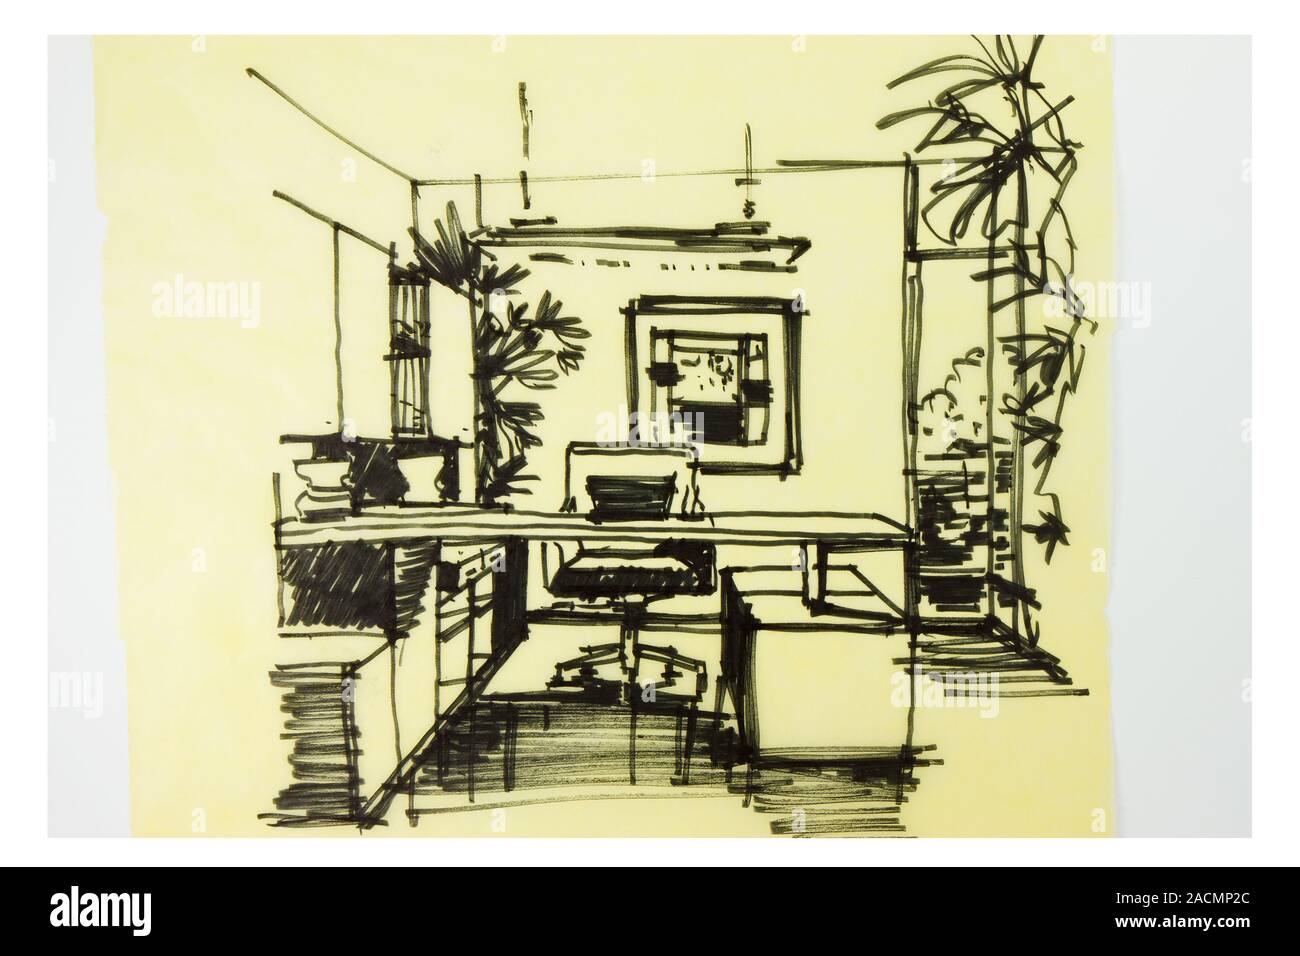 Graphic sketch an study room Stock Photo